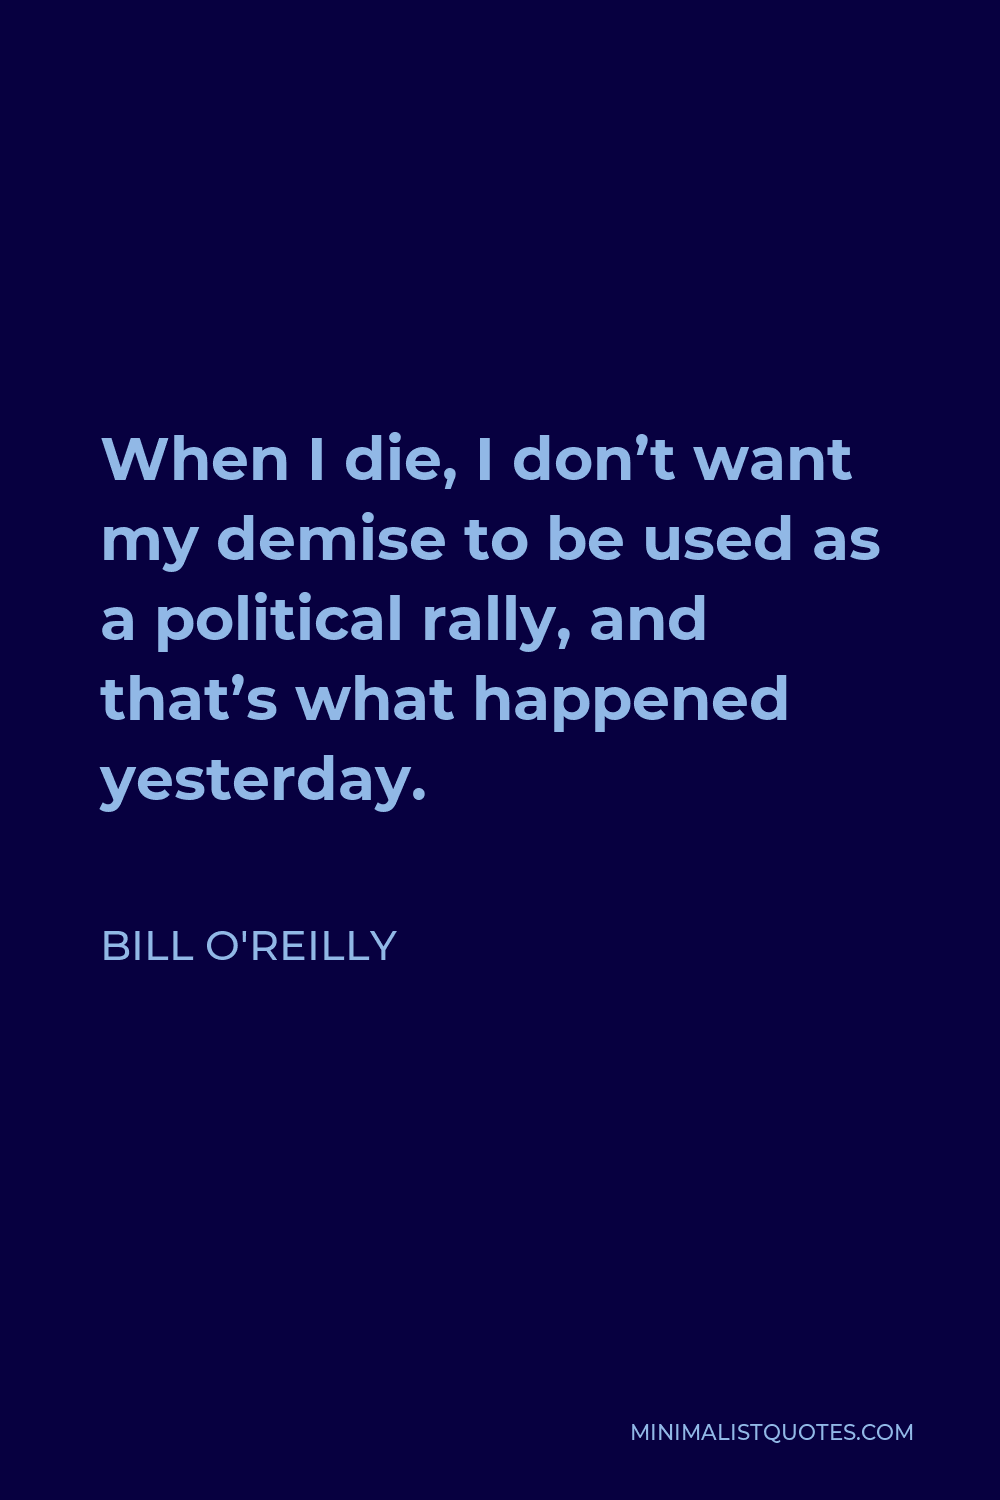 Bill O'Reilly Quote - When I die, I don’t want my demise to be used as a political rally, and that’s what happened yesterday.